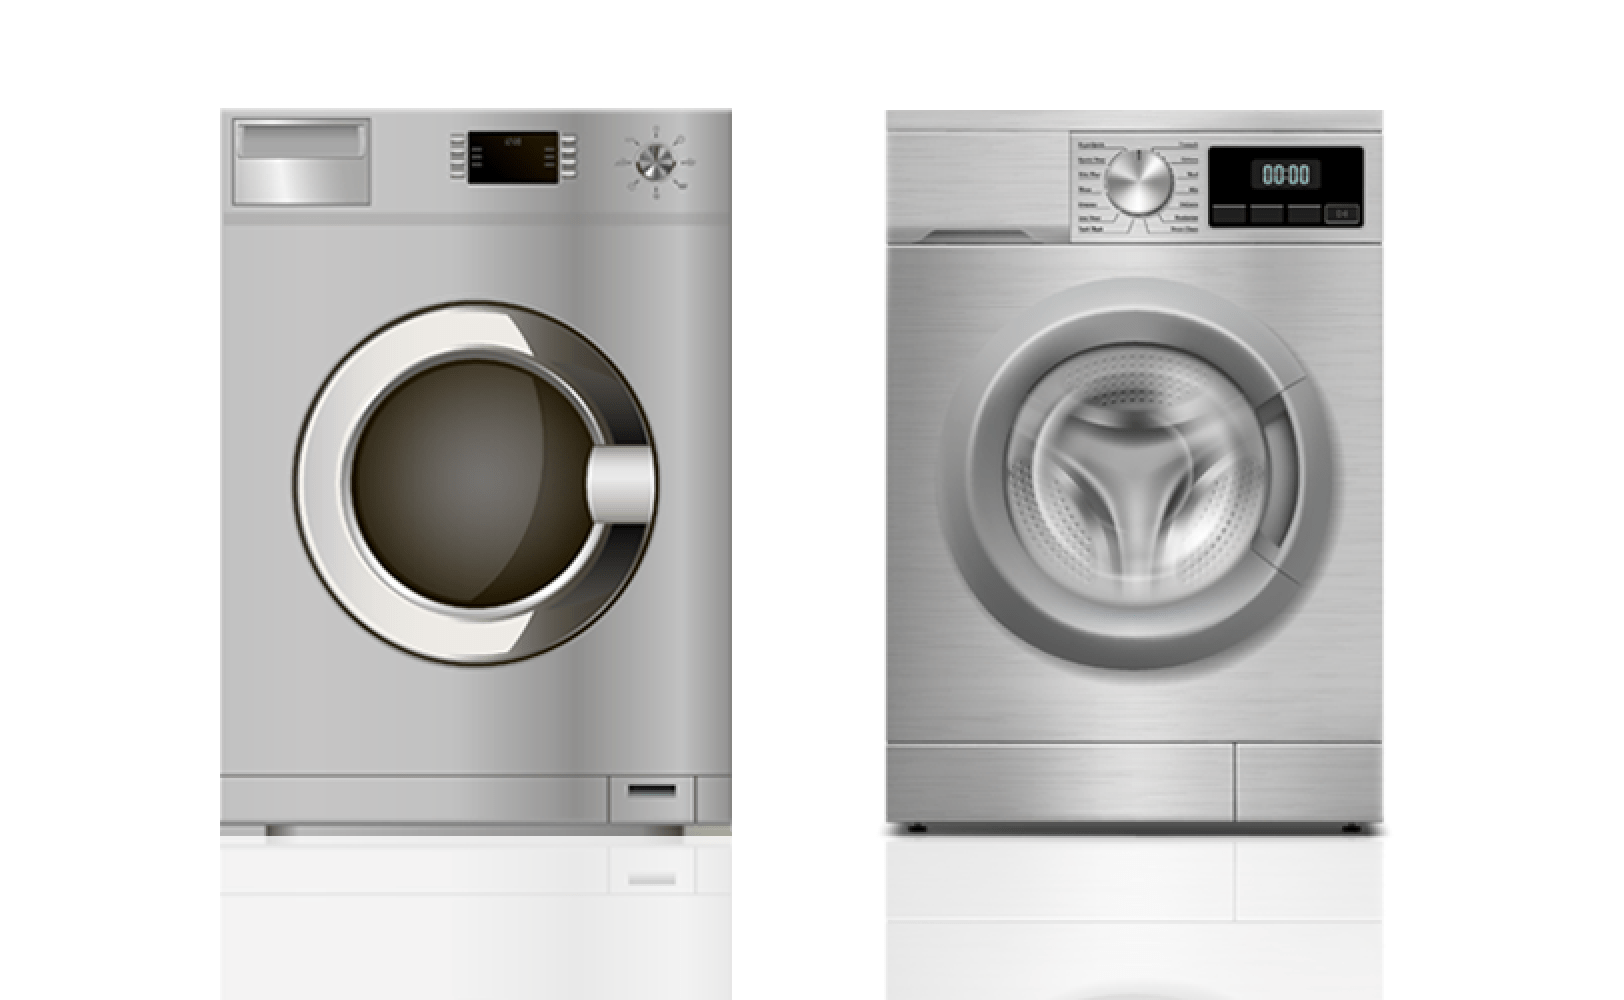 Washer Repair Service in Weymouth